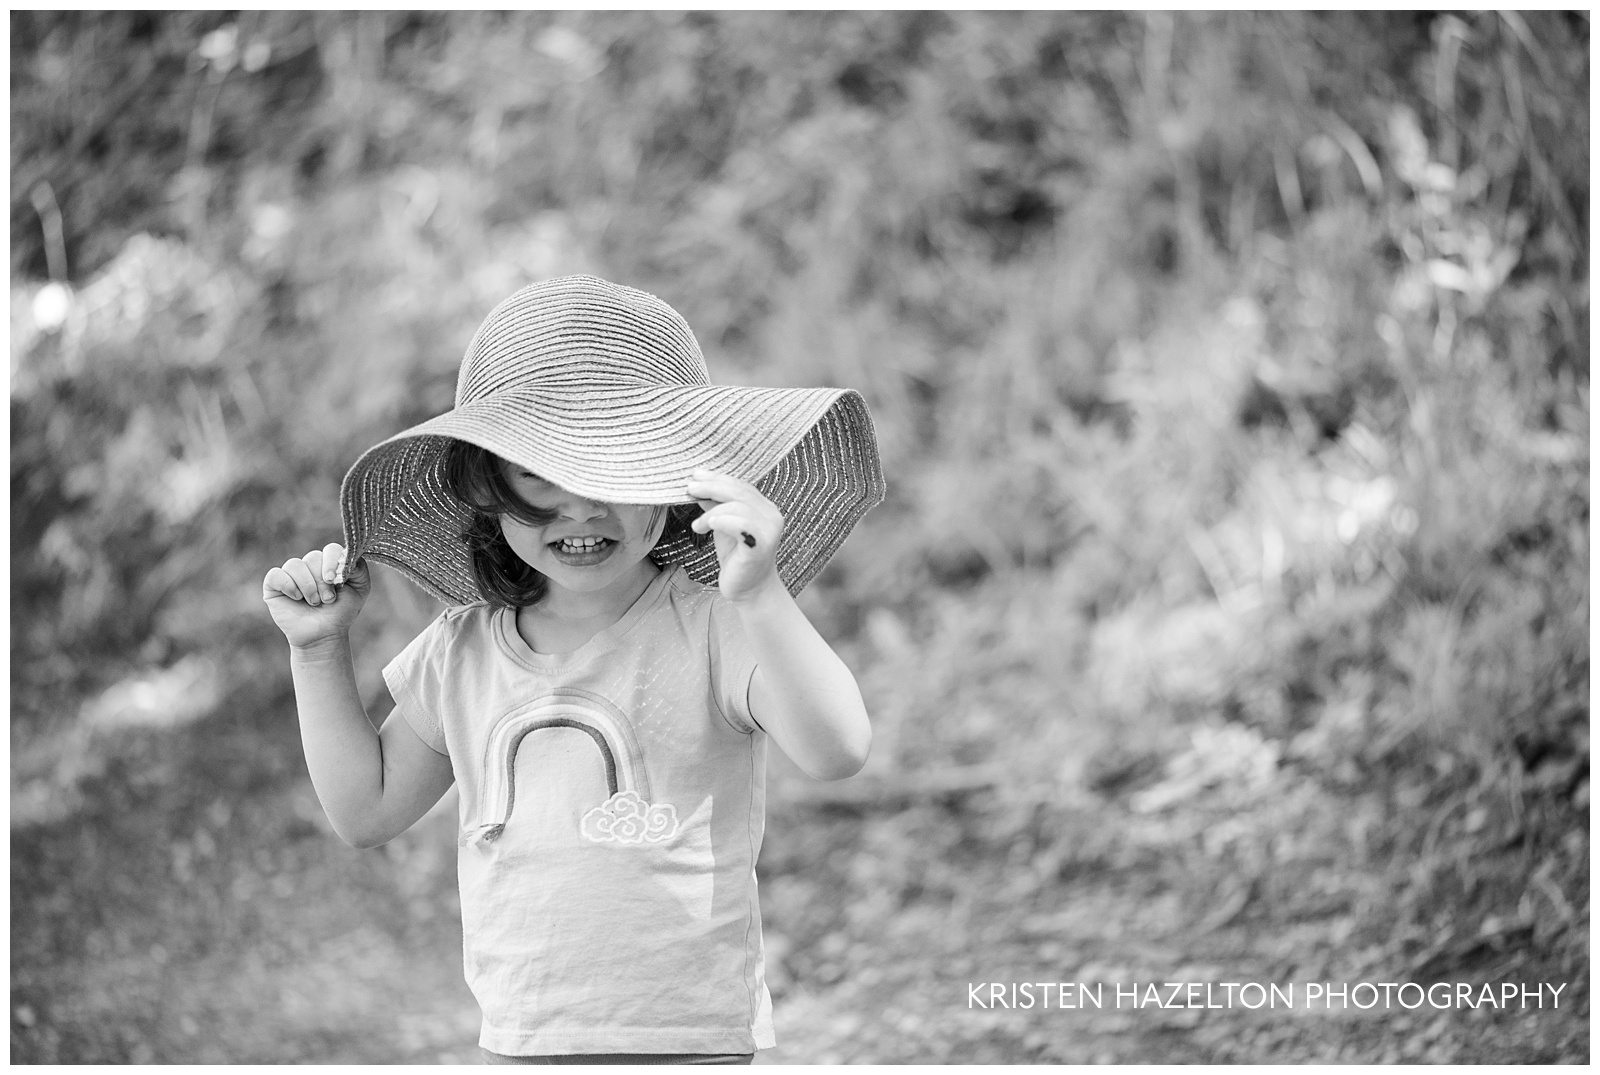 Toddler girl hiding under an adult's wide-brimmed sun hat